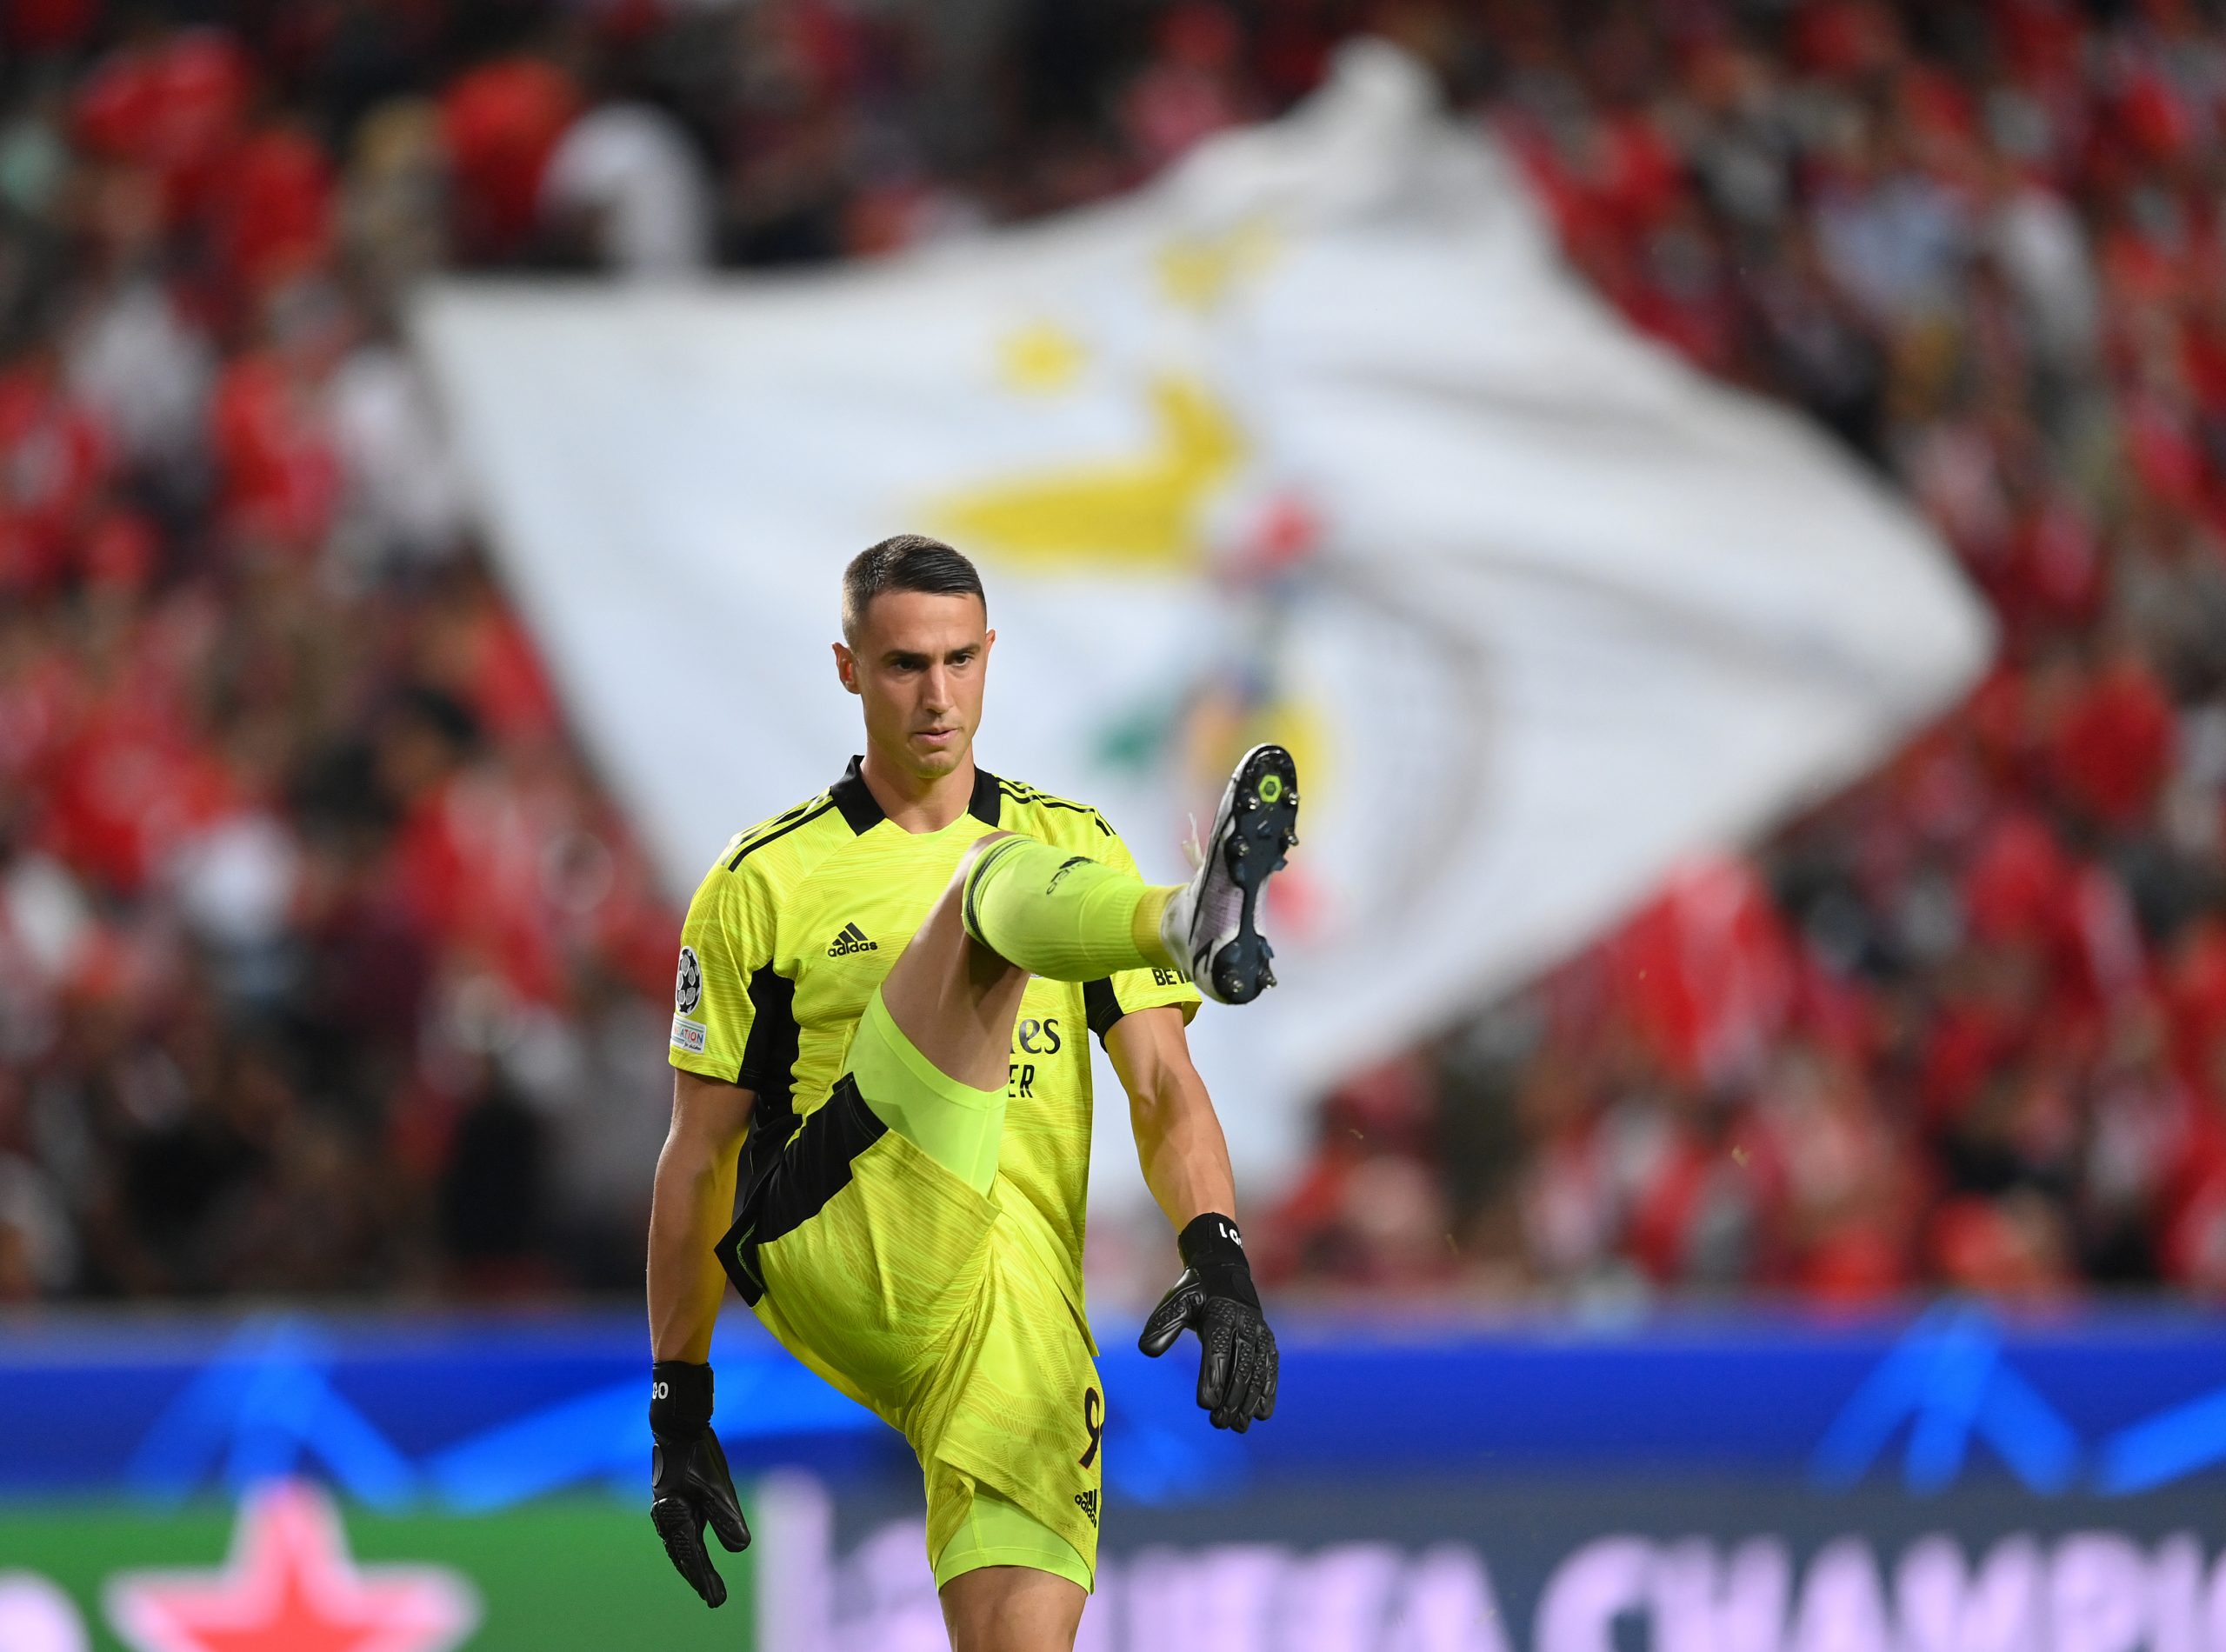 Manchester United want to sign Benfica keeper Odysseas Vlachodimos if Dean Henderson leaves.